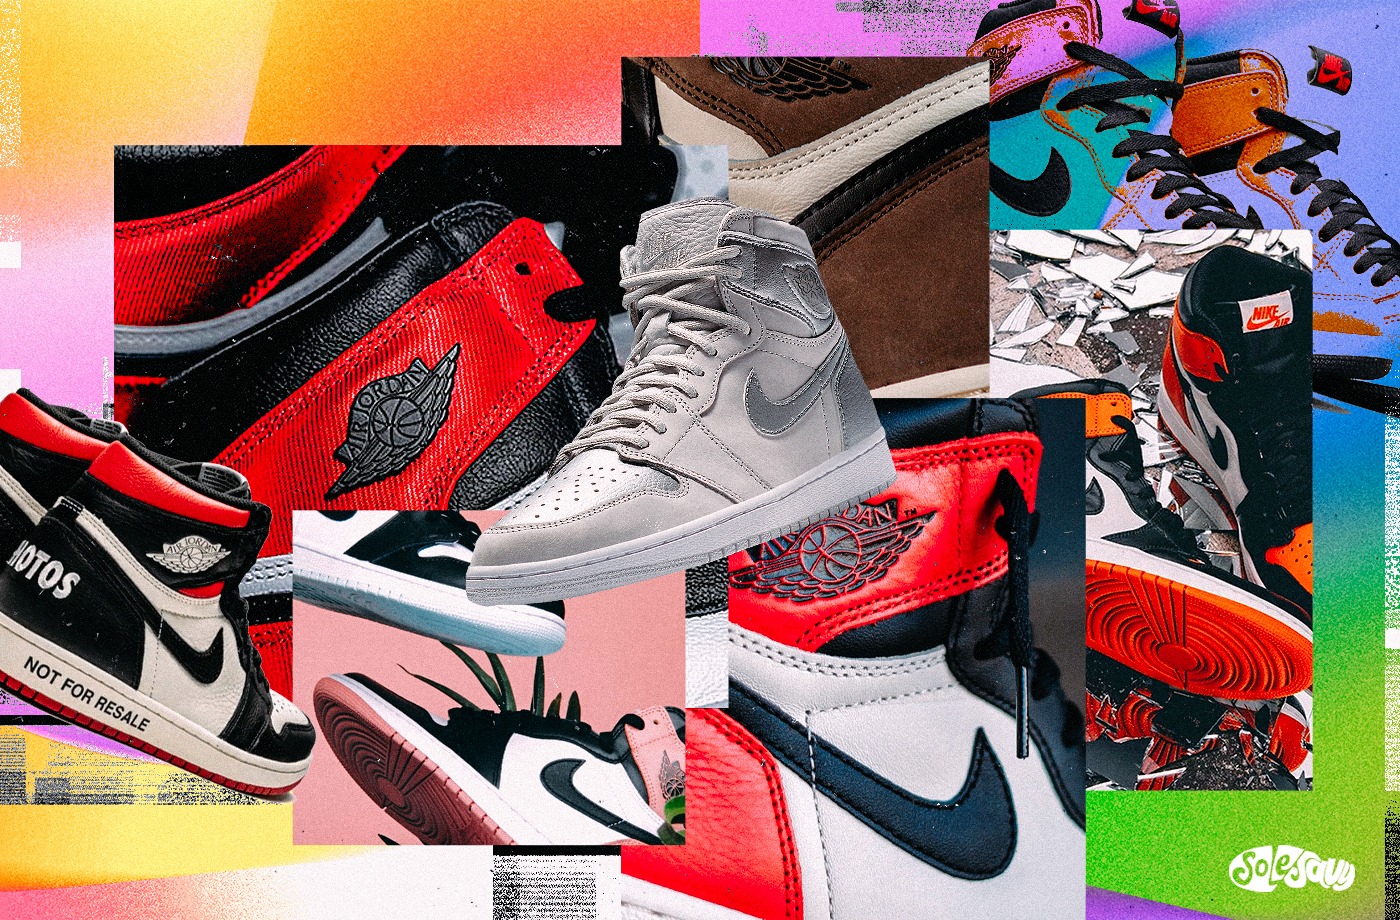 Off-White Jordan 1 UNC Extreme Cleaning Challenge presented by